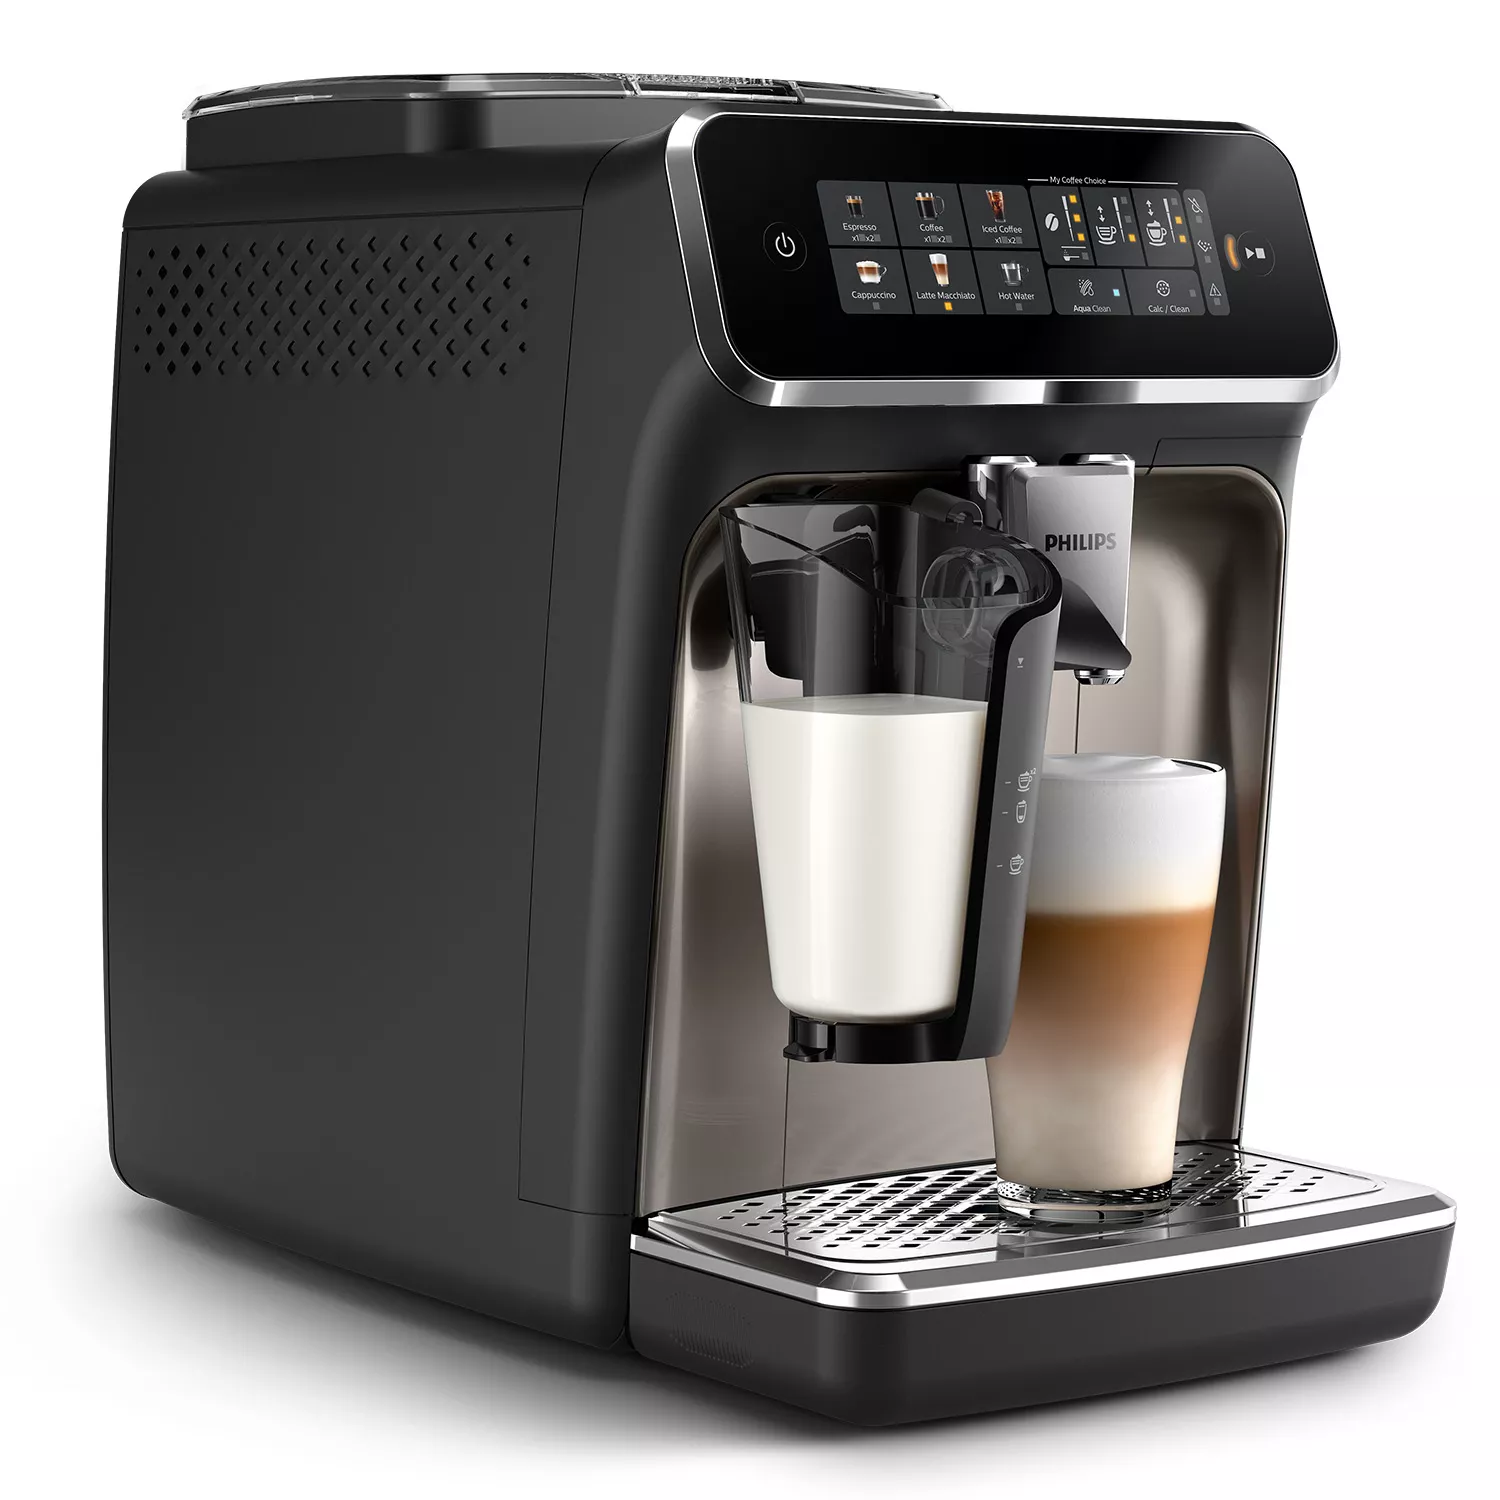 Philips 3300 Series Fully Automatic Espresso Machine with LatteGo Milk Frother 